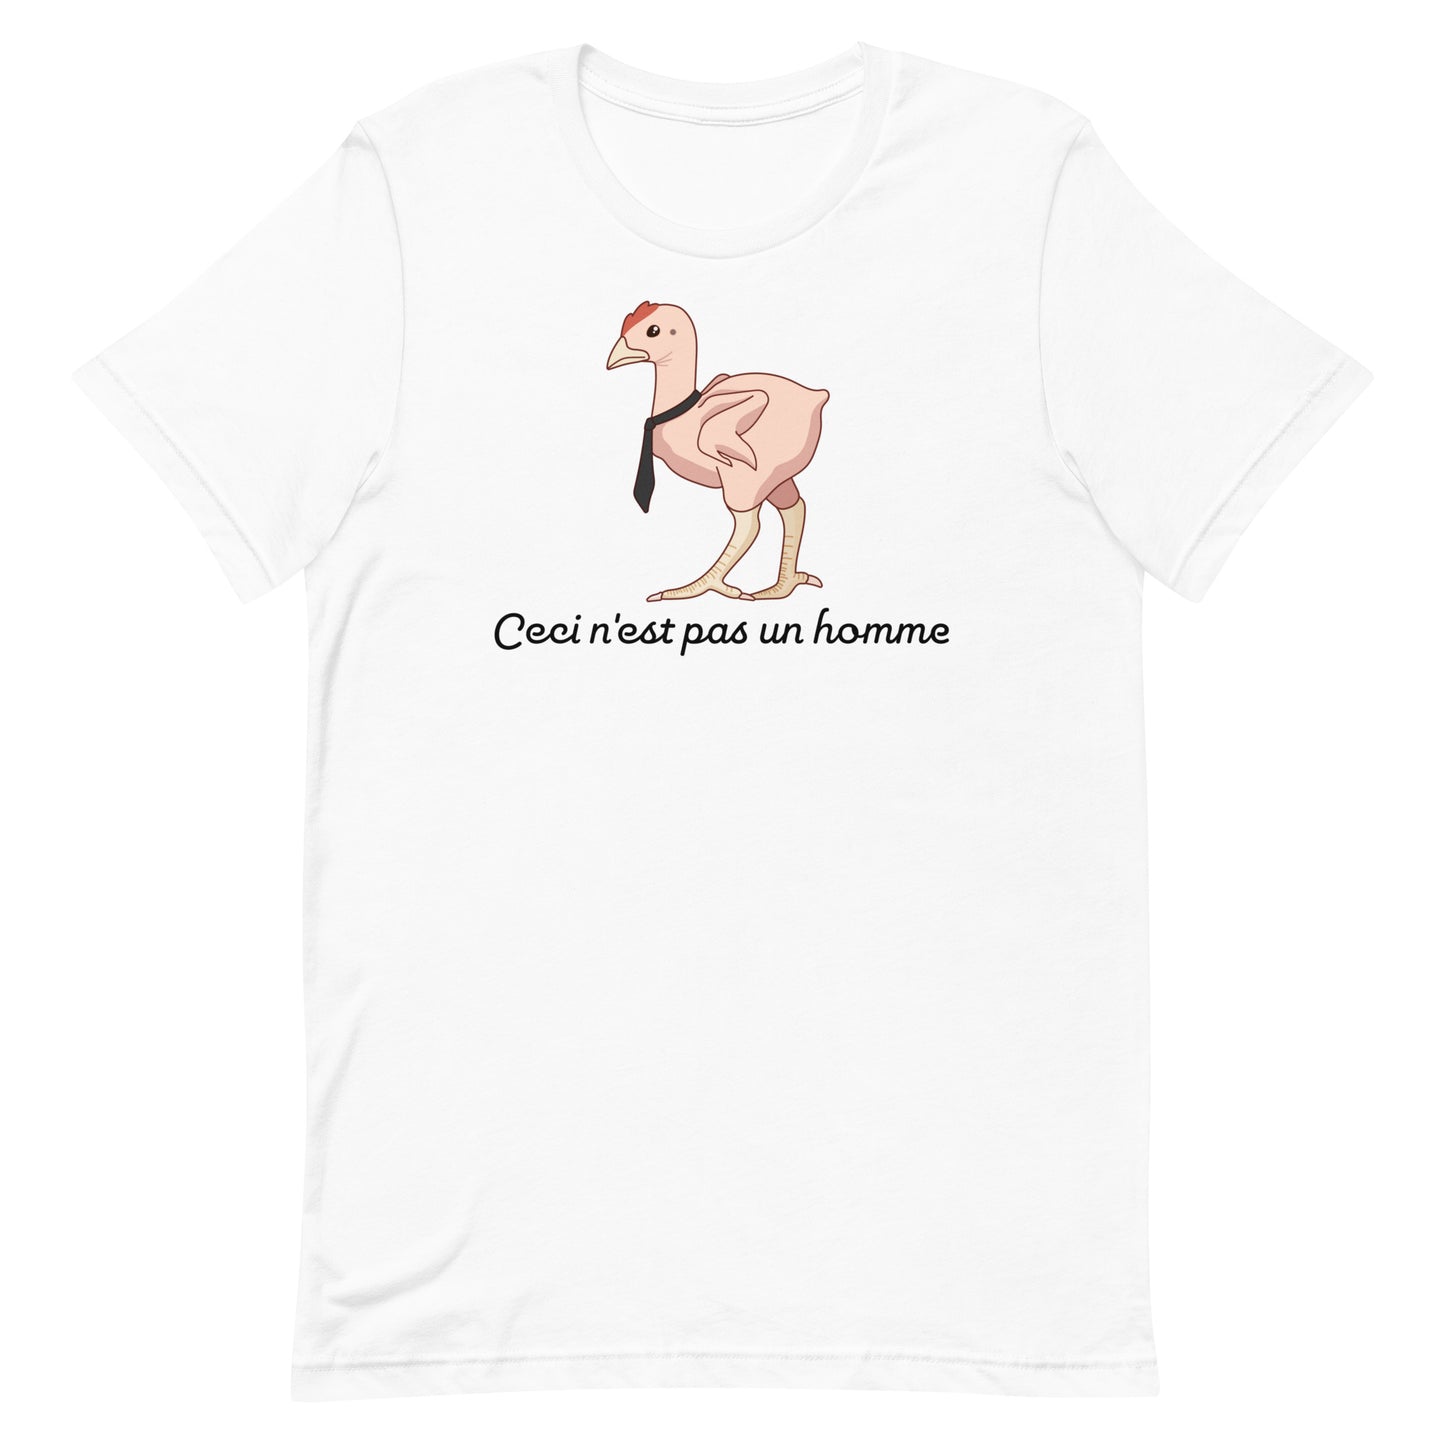 A white crewneck t-shirt featuring an illustration of a featherless chicken wearing a tie. Text underneath the chicken reads "Ceci n'est pas un homme" in a cursive font.